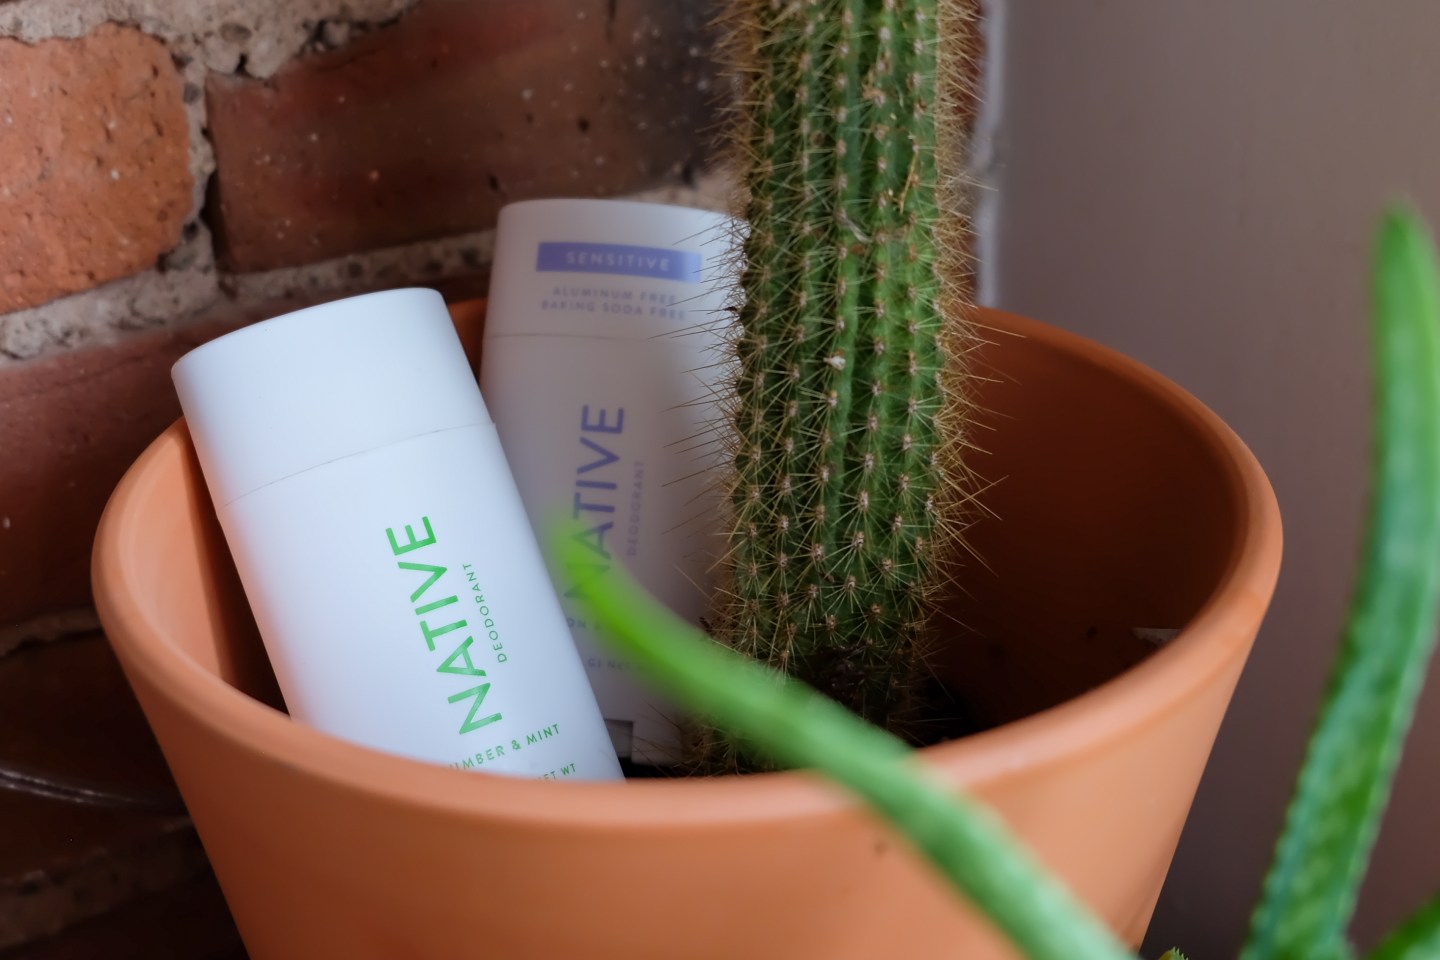 Native deodorant nestled into a terra cotta pot with a cactus in background - Native Deodorant Unsponsored Review